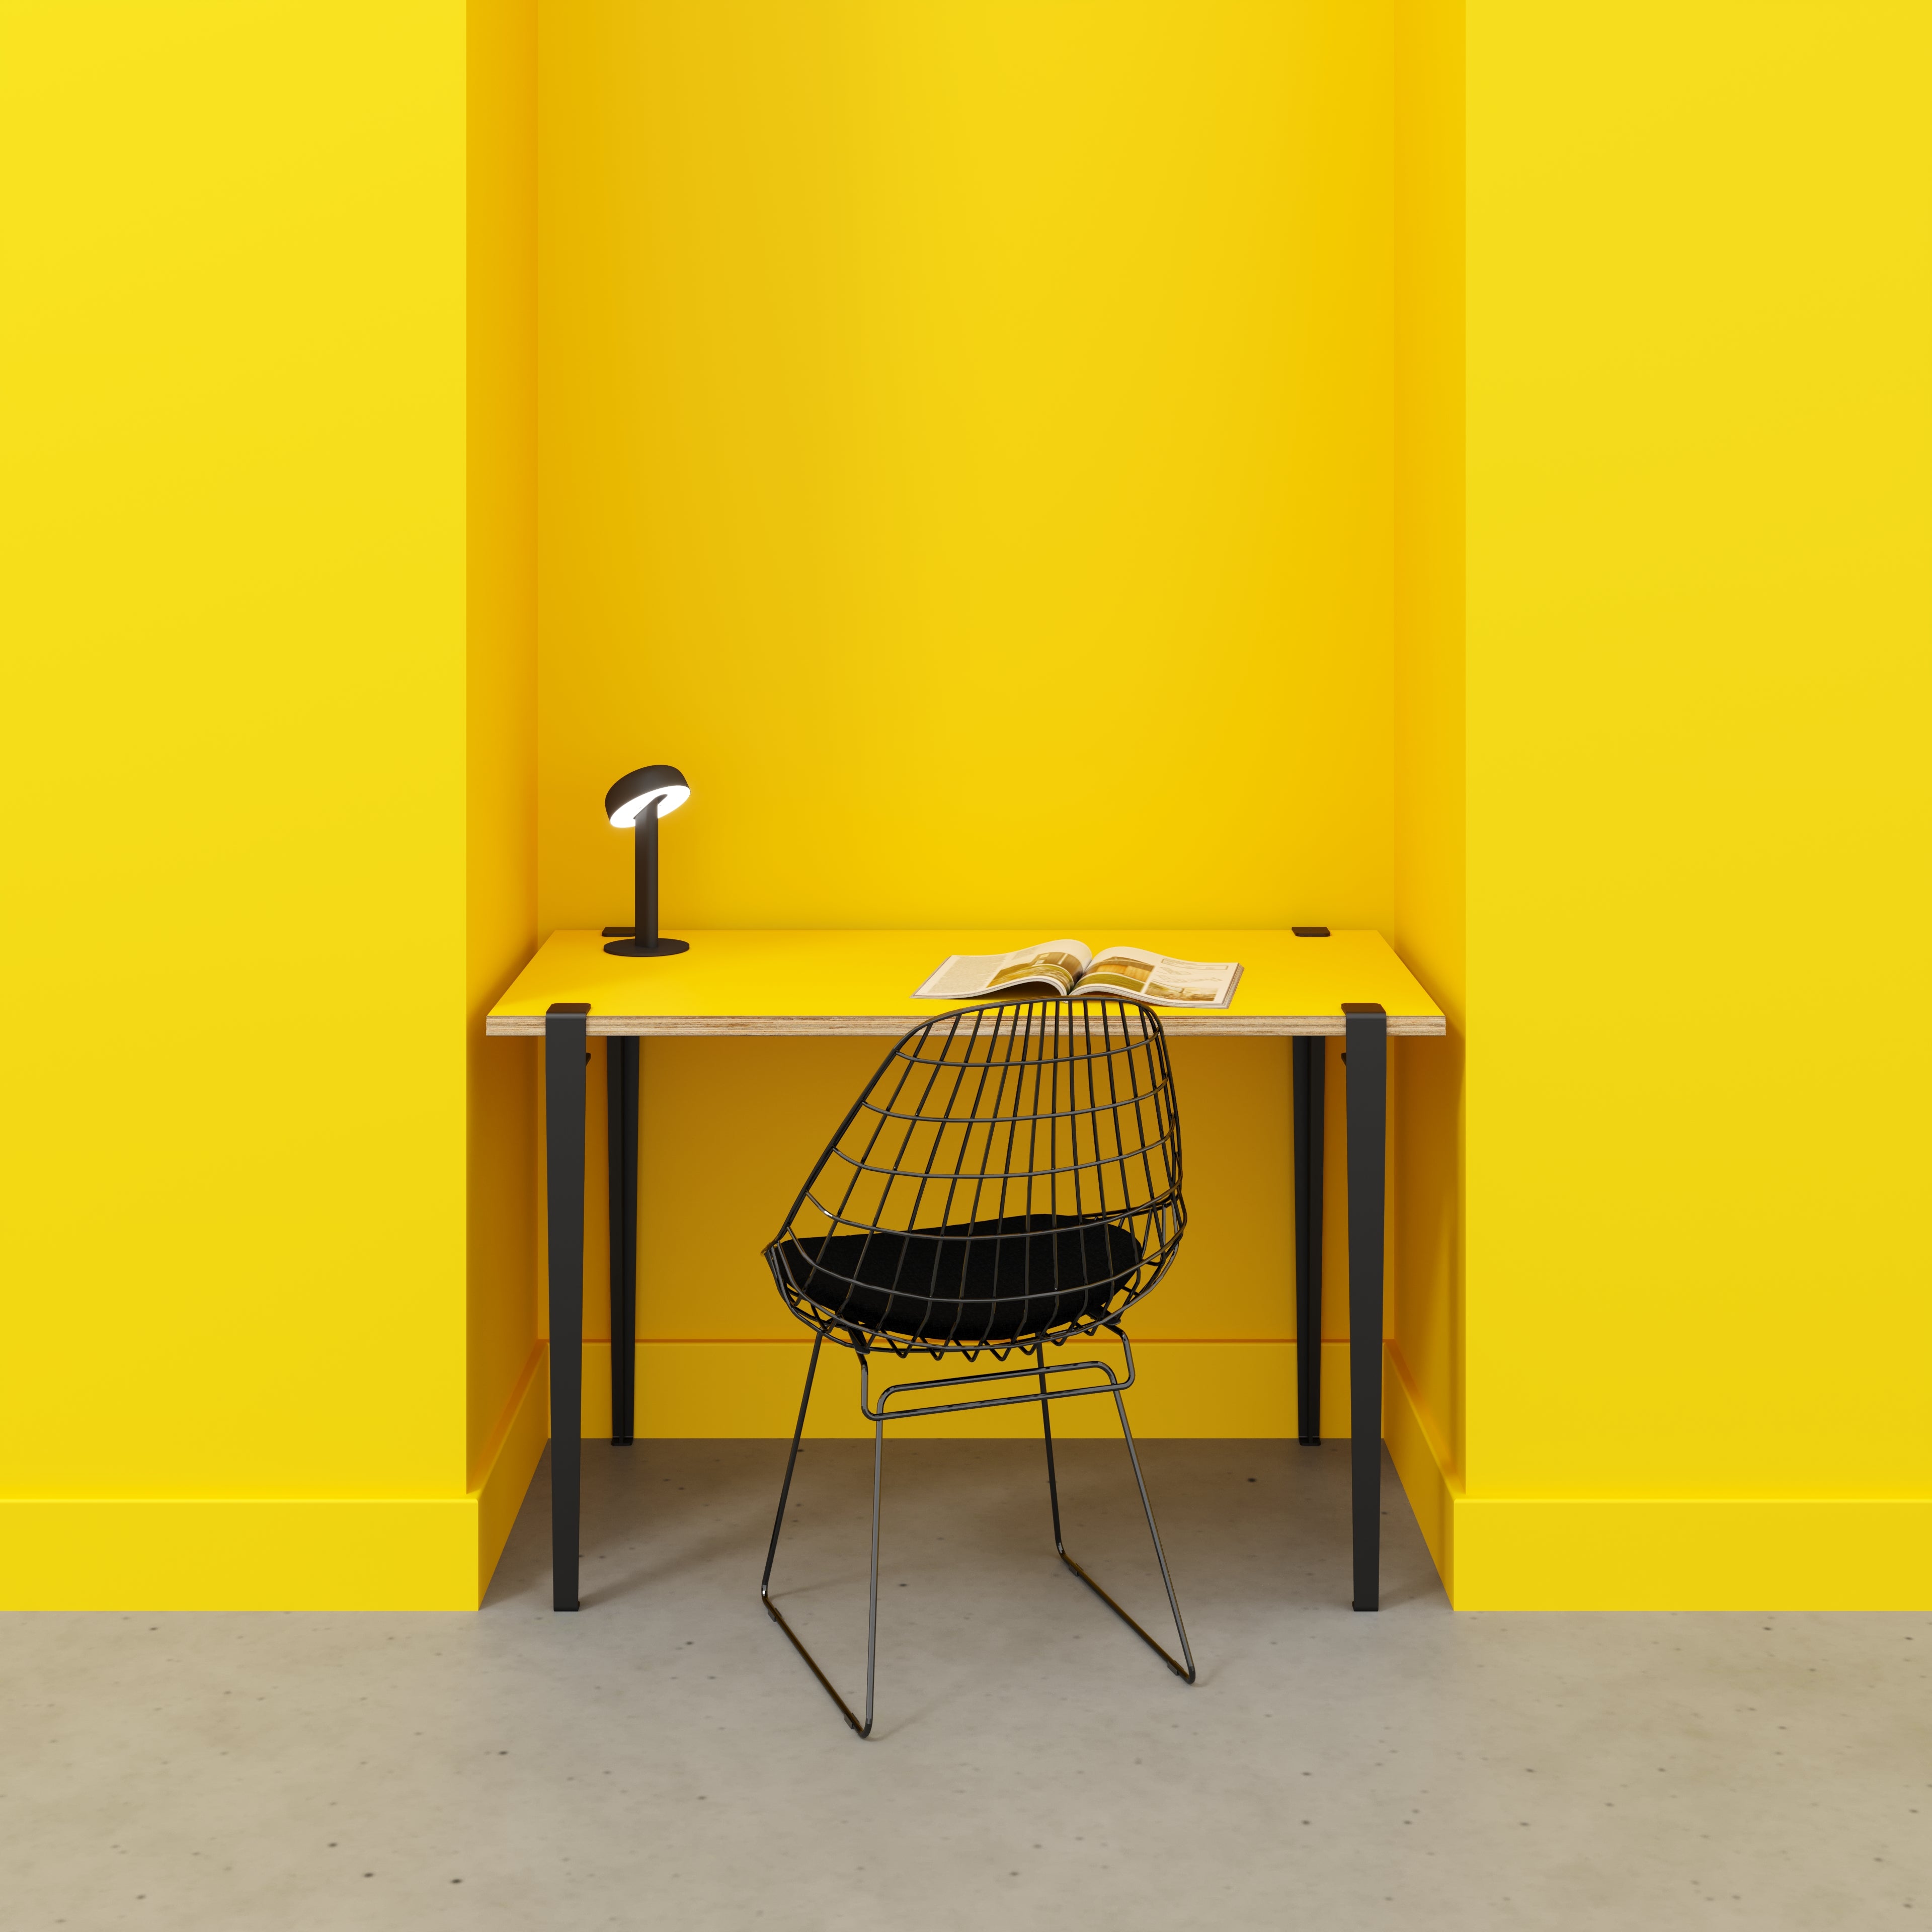 Desk with Black Tiptoe Legs - Formica Chrome Yellow - 1200(w) x 600(d) x 750(h)